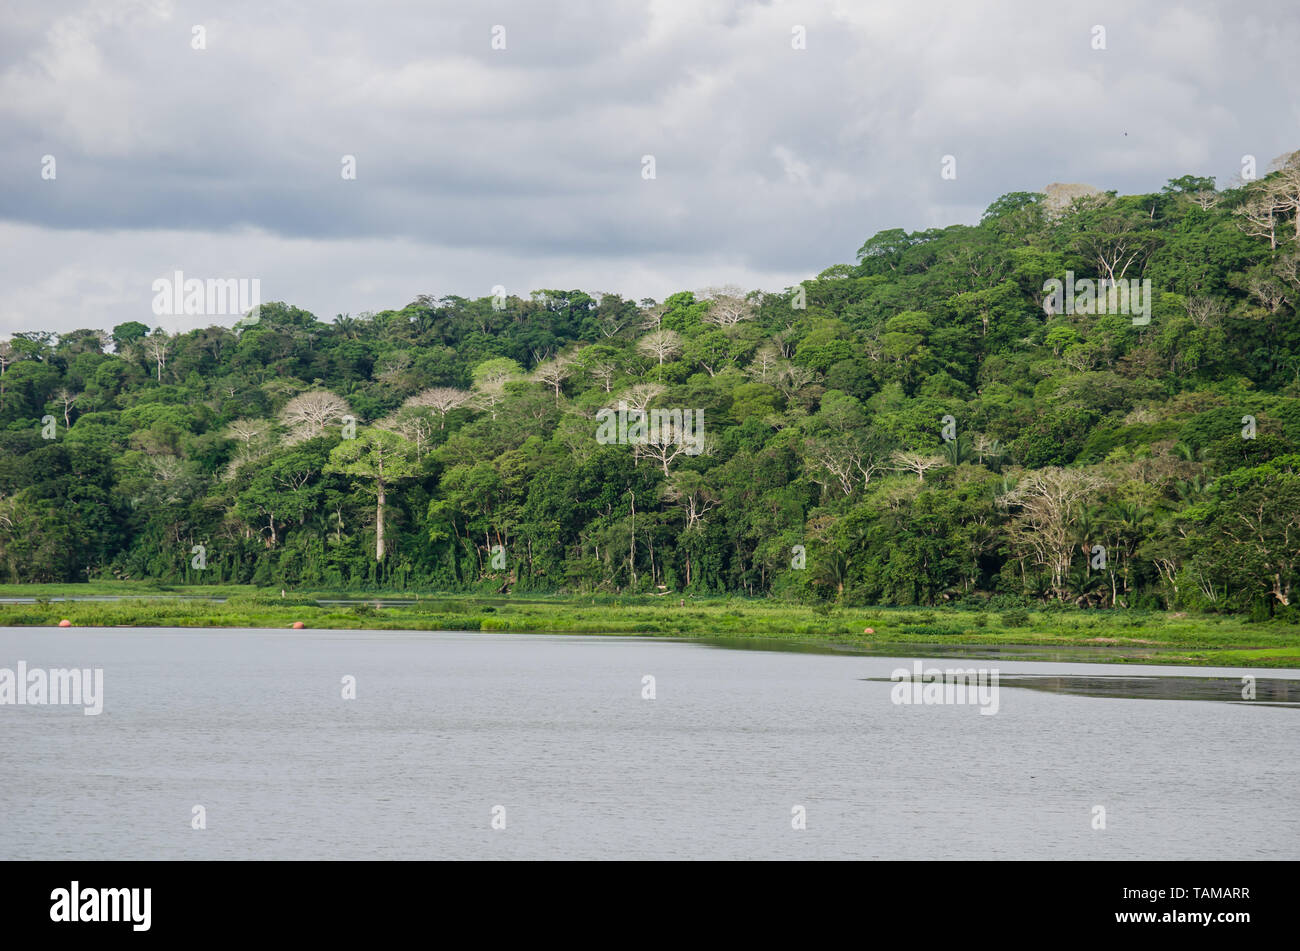 The Chagres River and the Soberania National Park in the distance Stock Photo